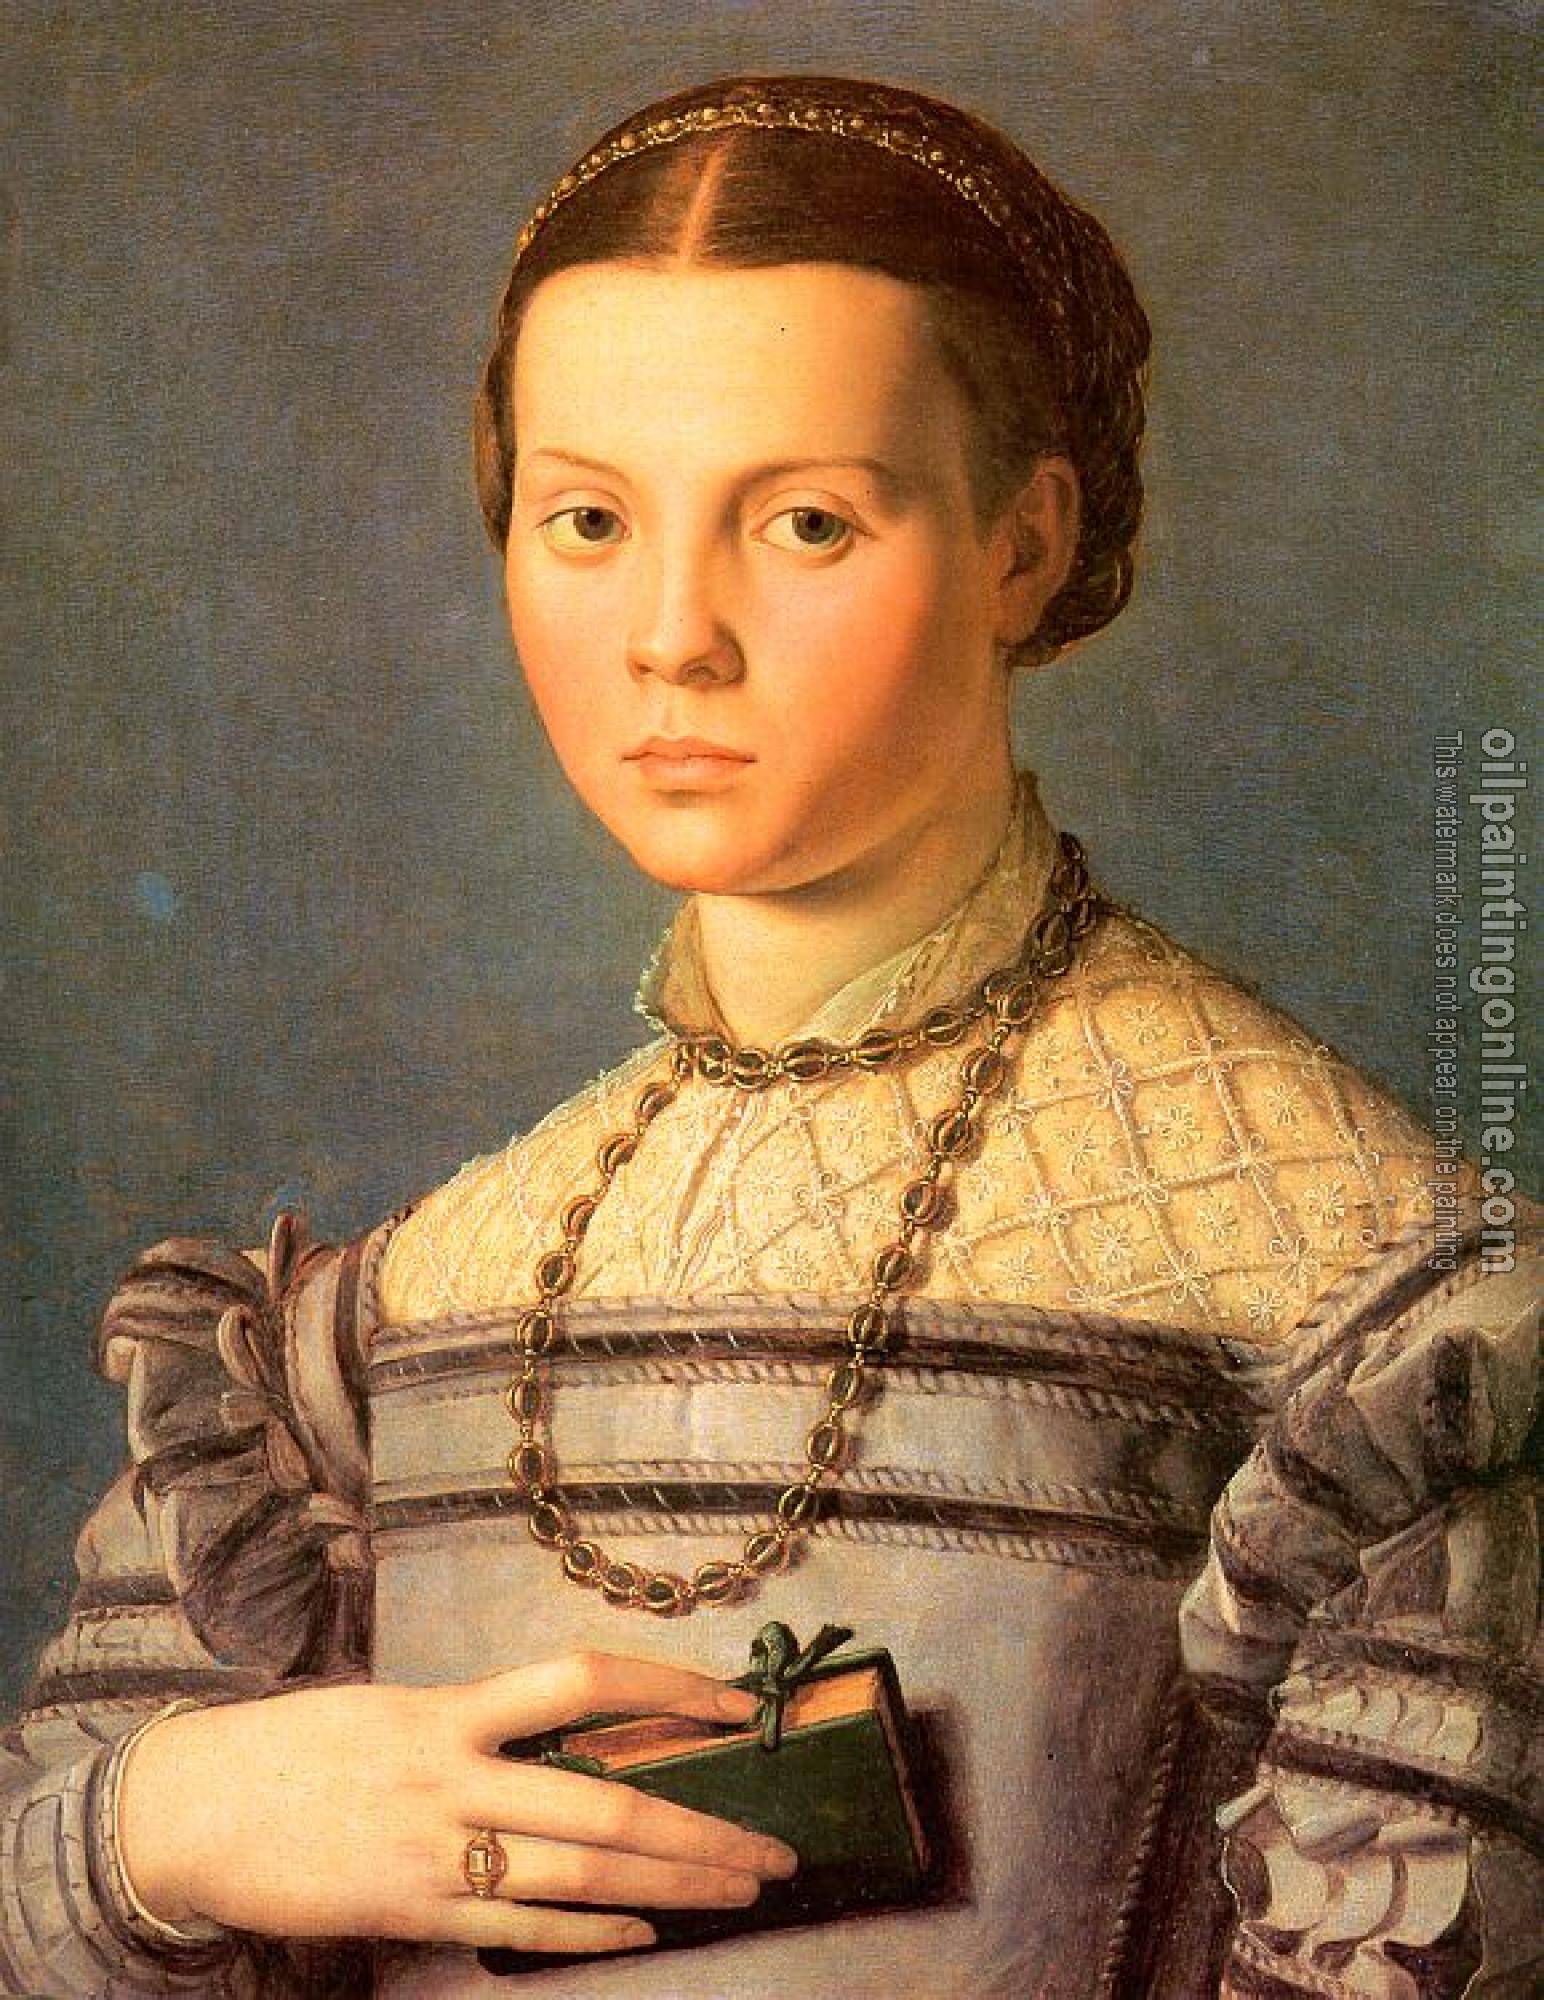 Bronzino, Agnolo - Portrait of a Young Girl with a Prayer Book